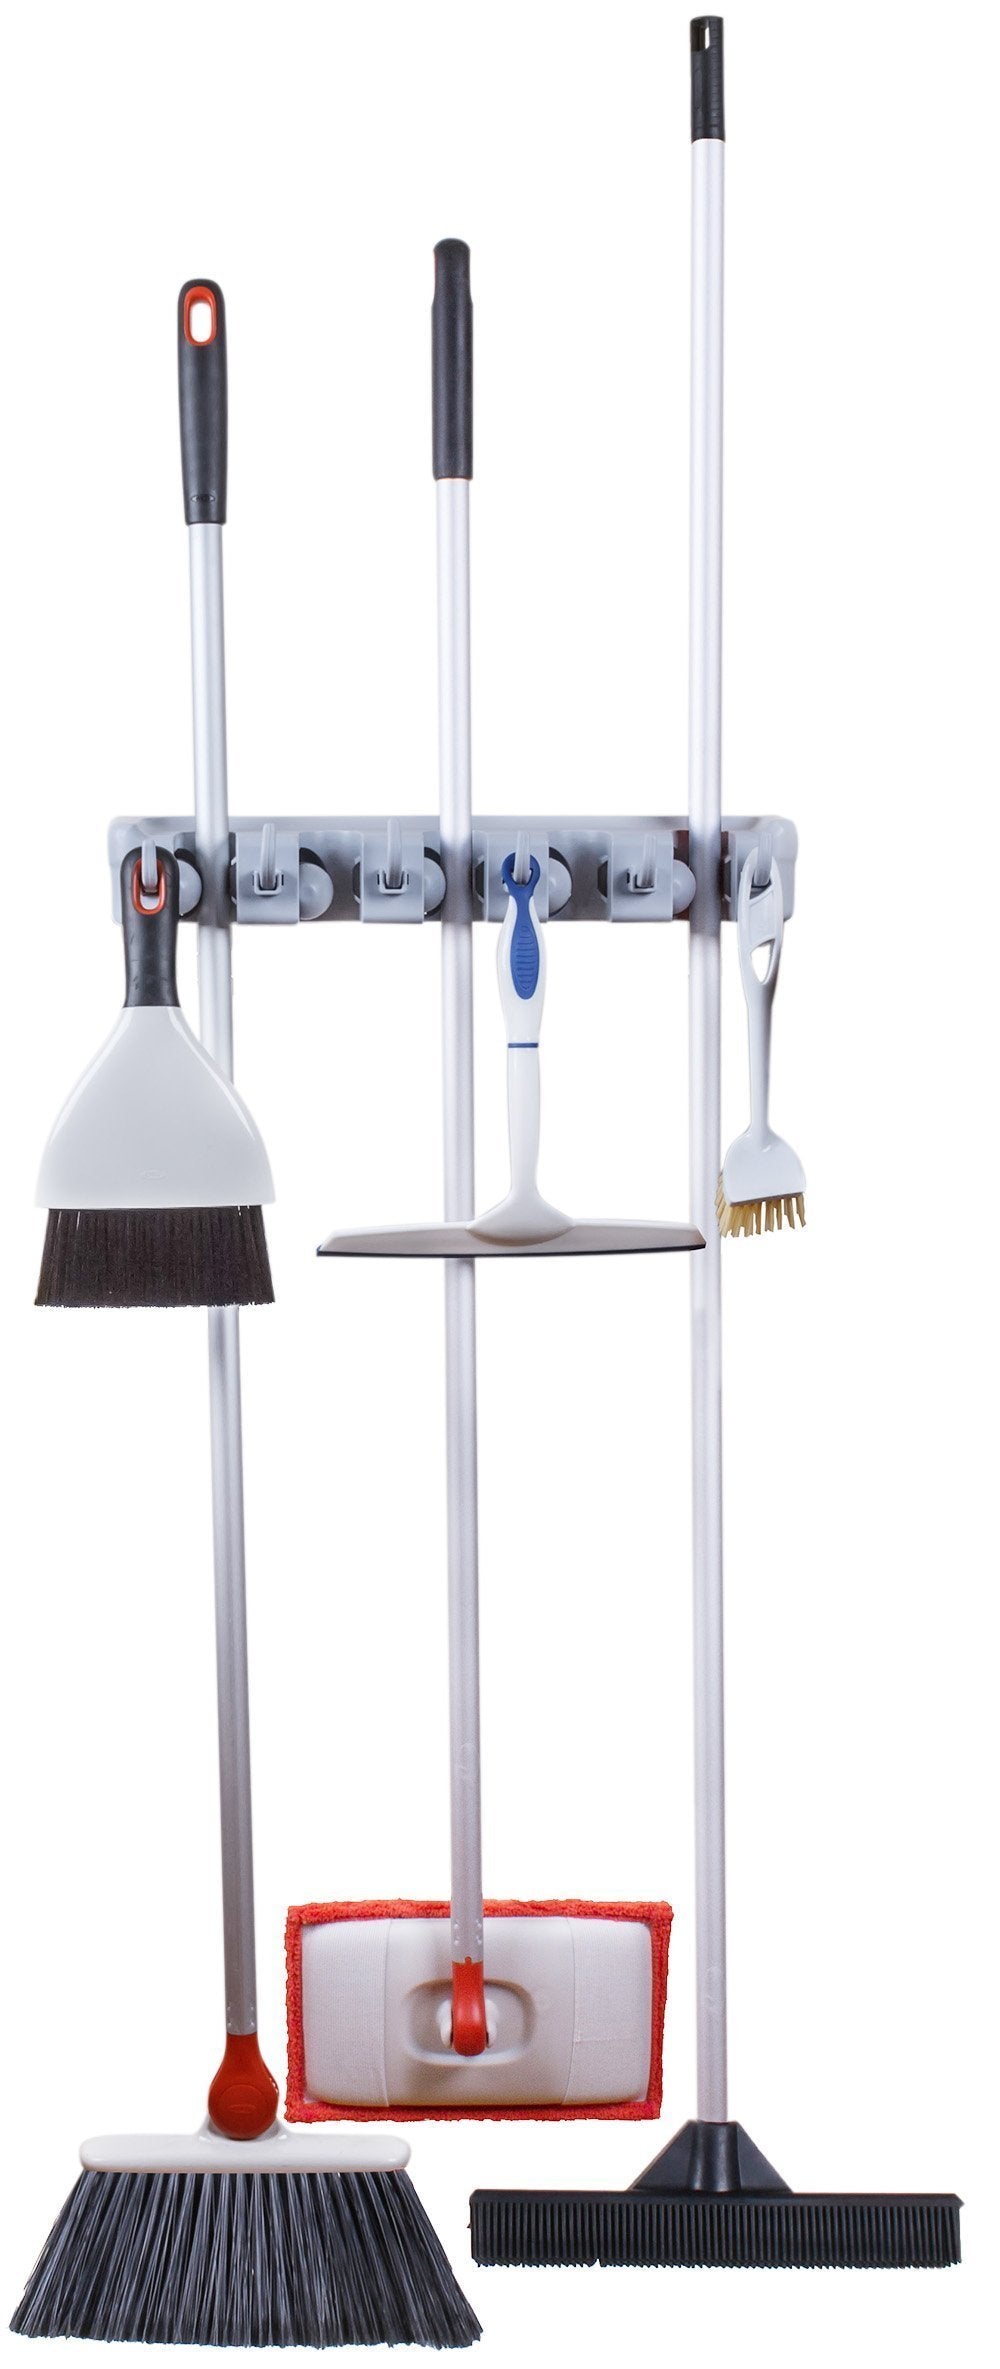 Products greenco mop and broom organiser wall and closet mount organizer rack holds brooms mops rakes garden equipment tools and more contains 5 non slip automatically adjustable holders and 6 hooks